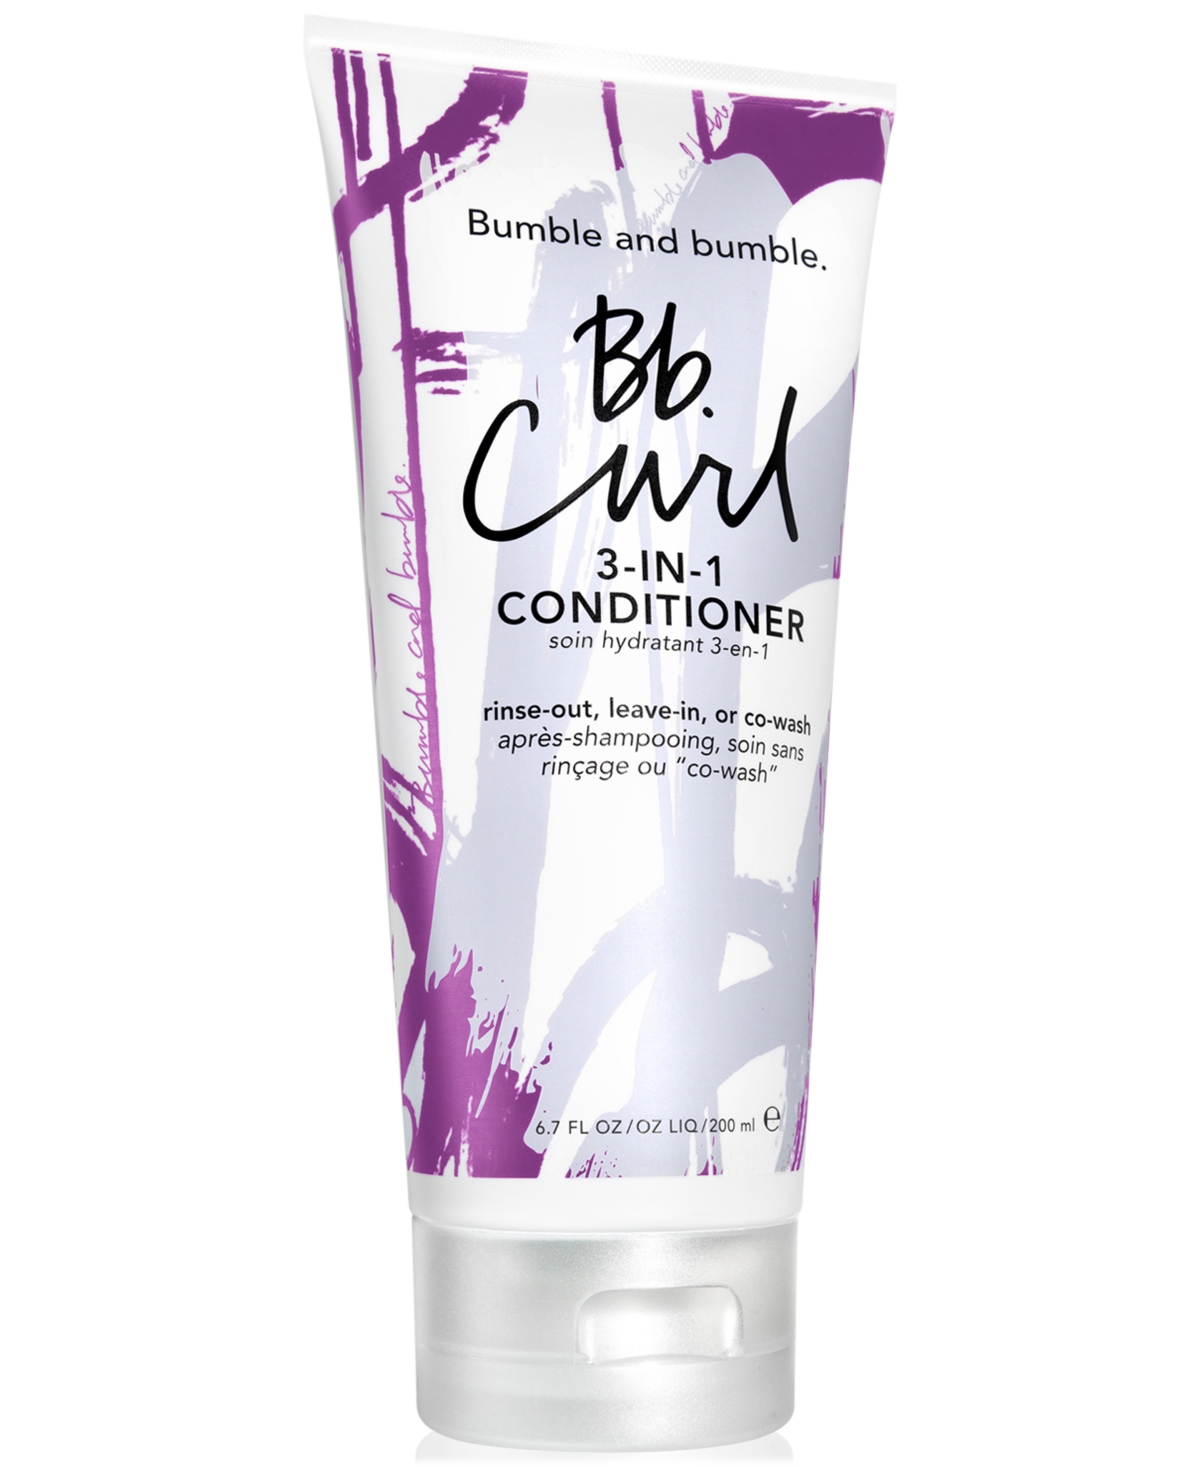 Bumble and Bumble Curl 3-In-1 Conditioner, 6.7 oz.